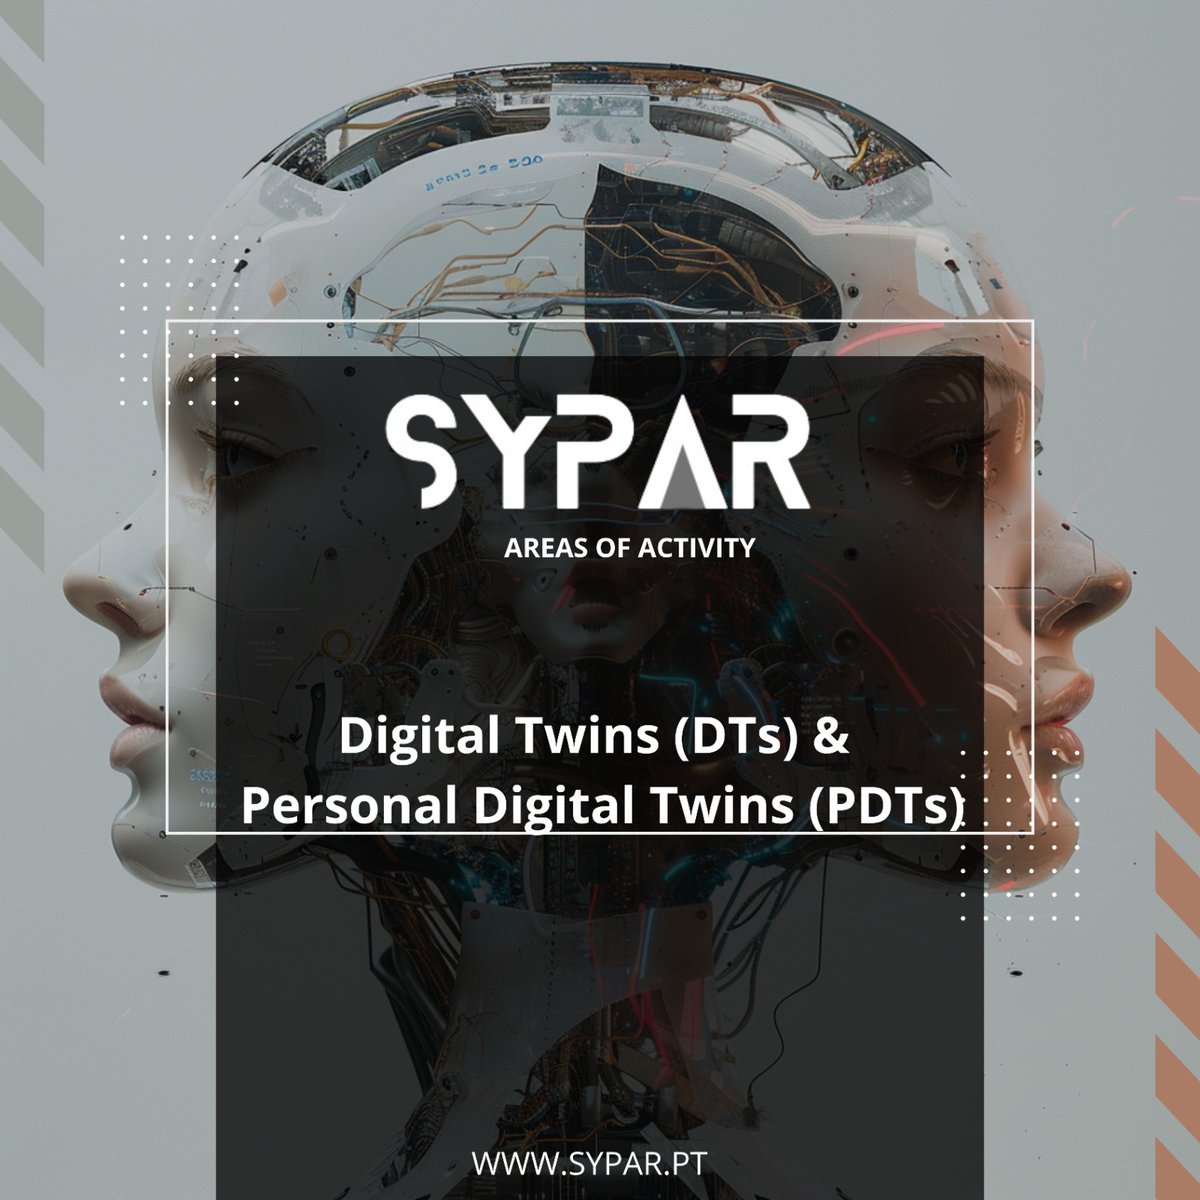 #Digitaltwins utilize #IoT and #AI to dynamically simulate tangible and intangible entities, evolving with their physical counterparts for real-time insights and enhanced decision-making. #Personaldigitaltwins personalize experiences by mirroring individual behaviors.